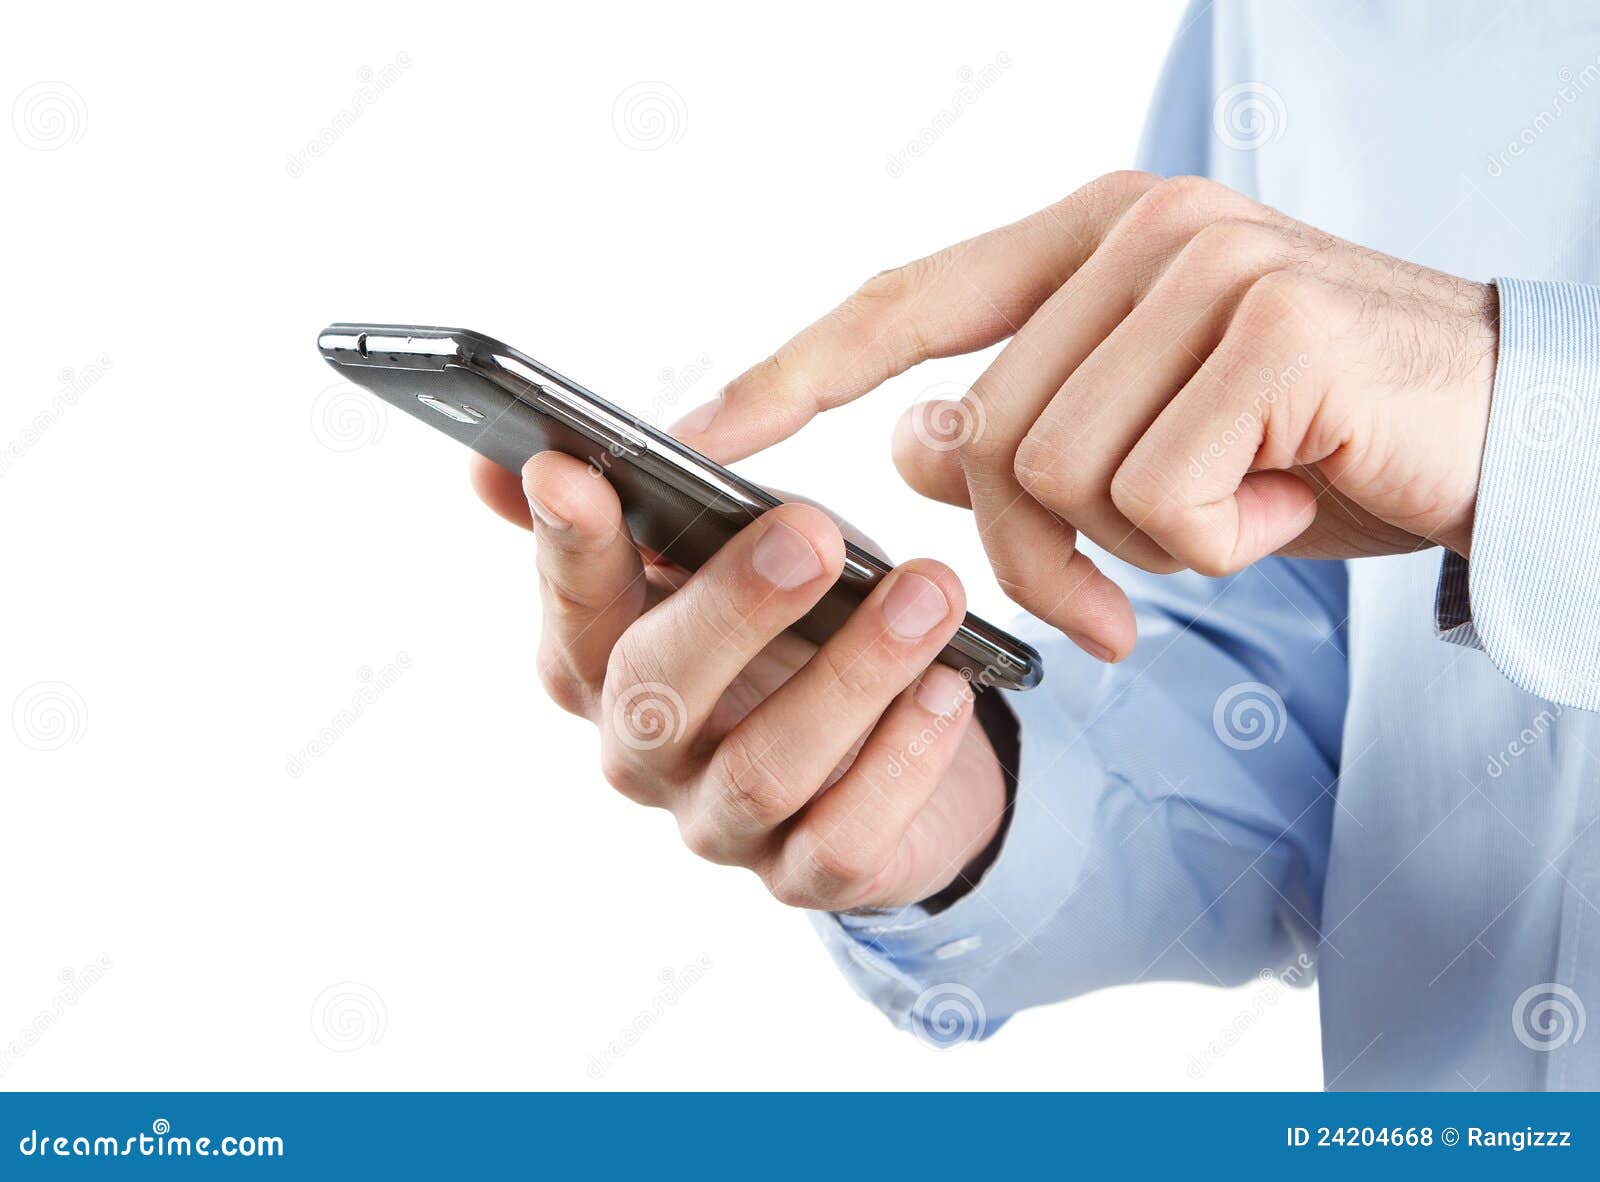 Using smart phone stock photo. Image of cellular, call - 24204668